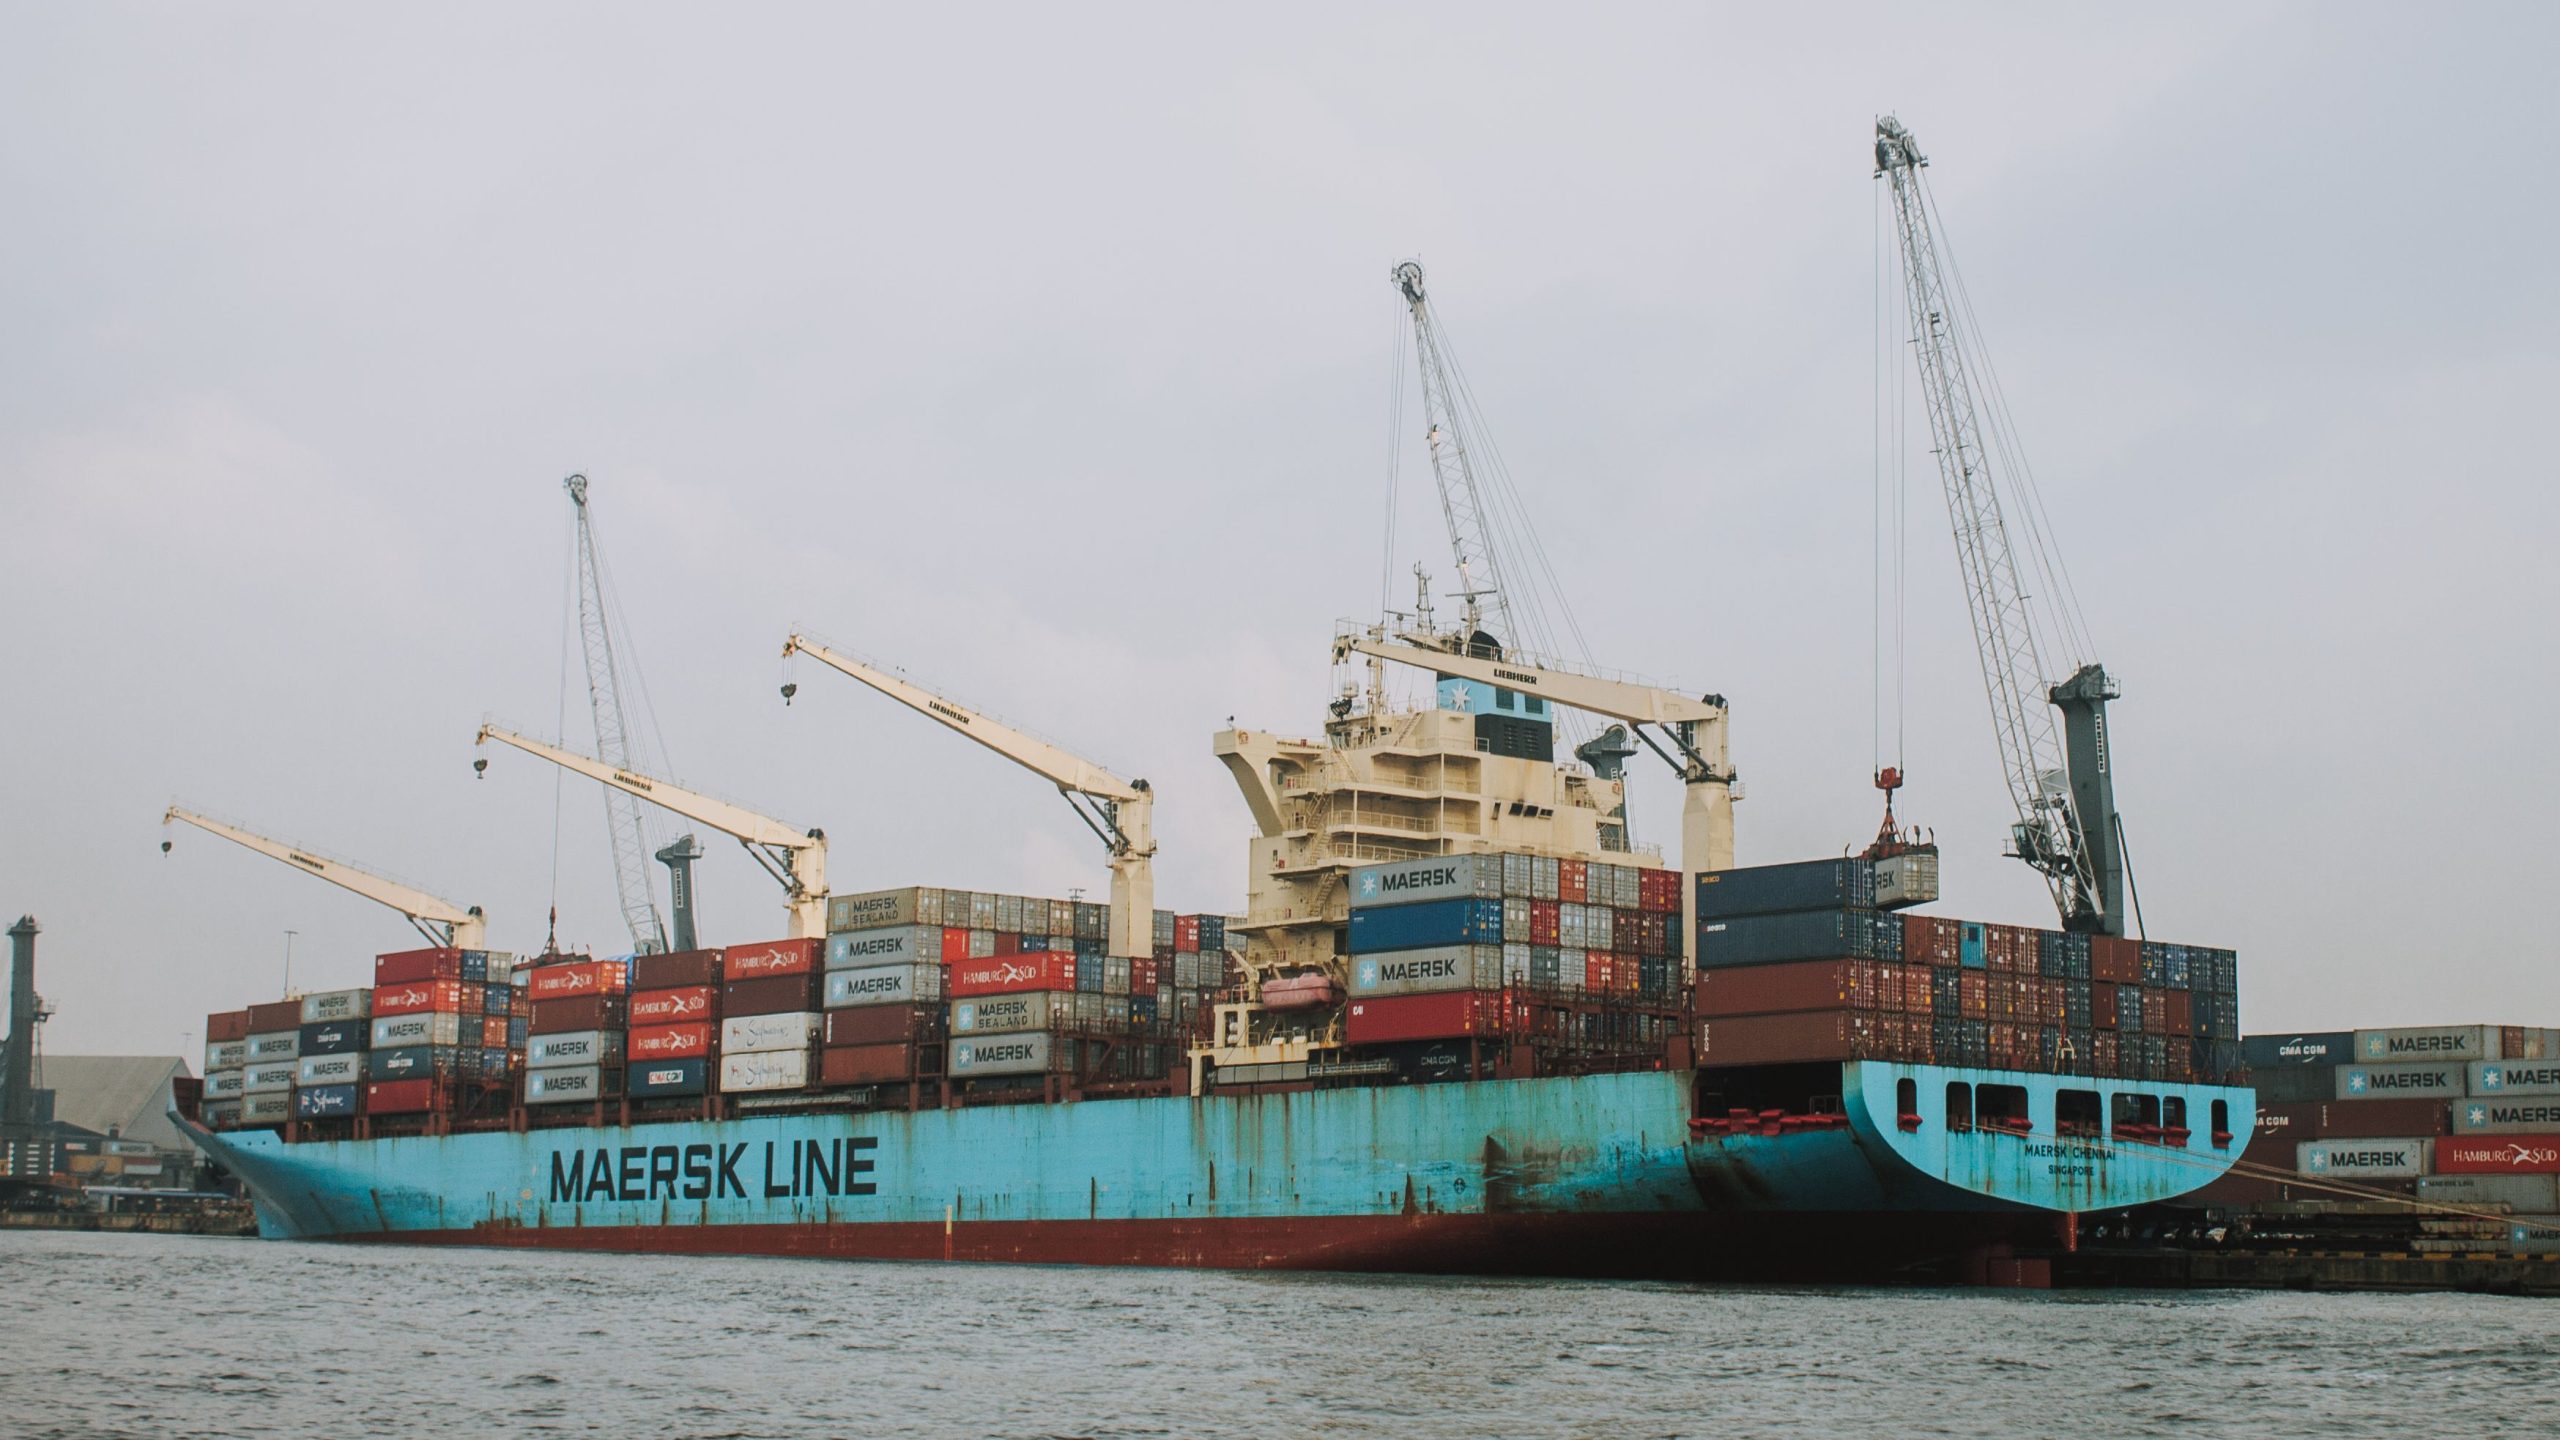 Maersk to inject US$ 600 million into Nigeria’s port infrastructure ‣ WorldCargo News